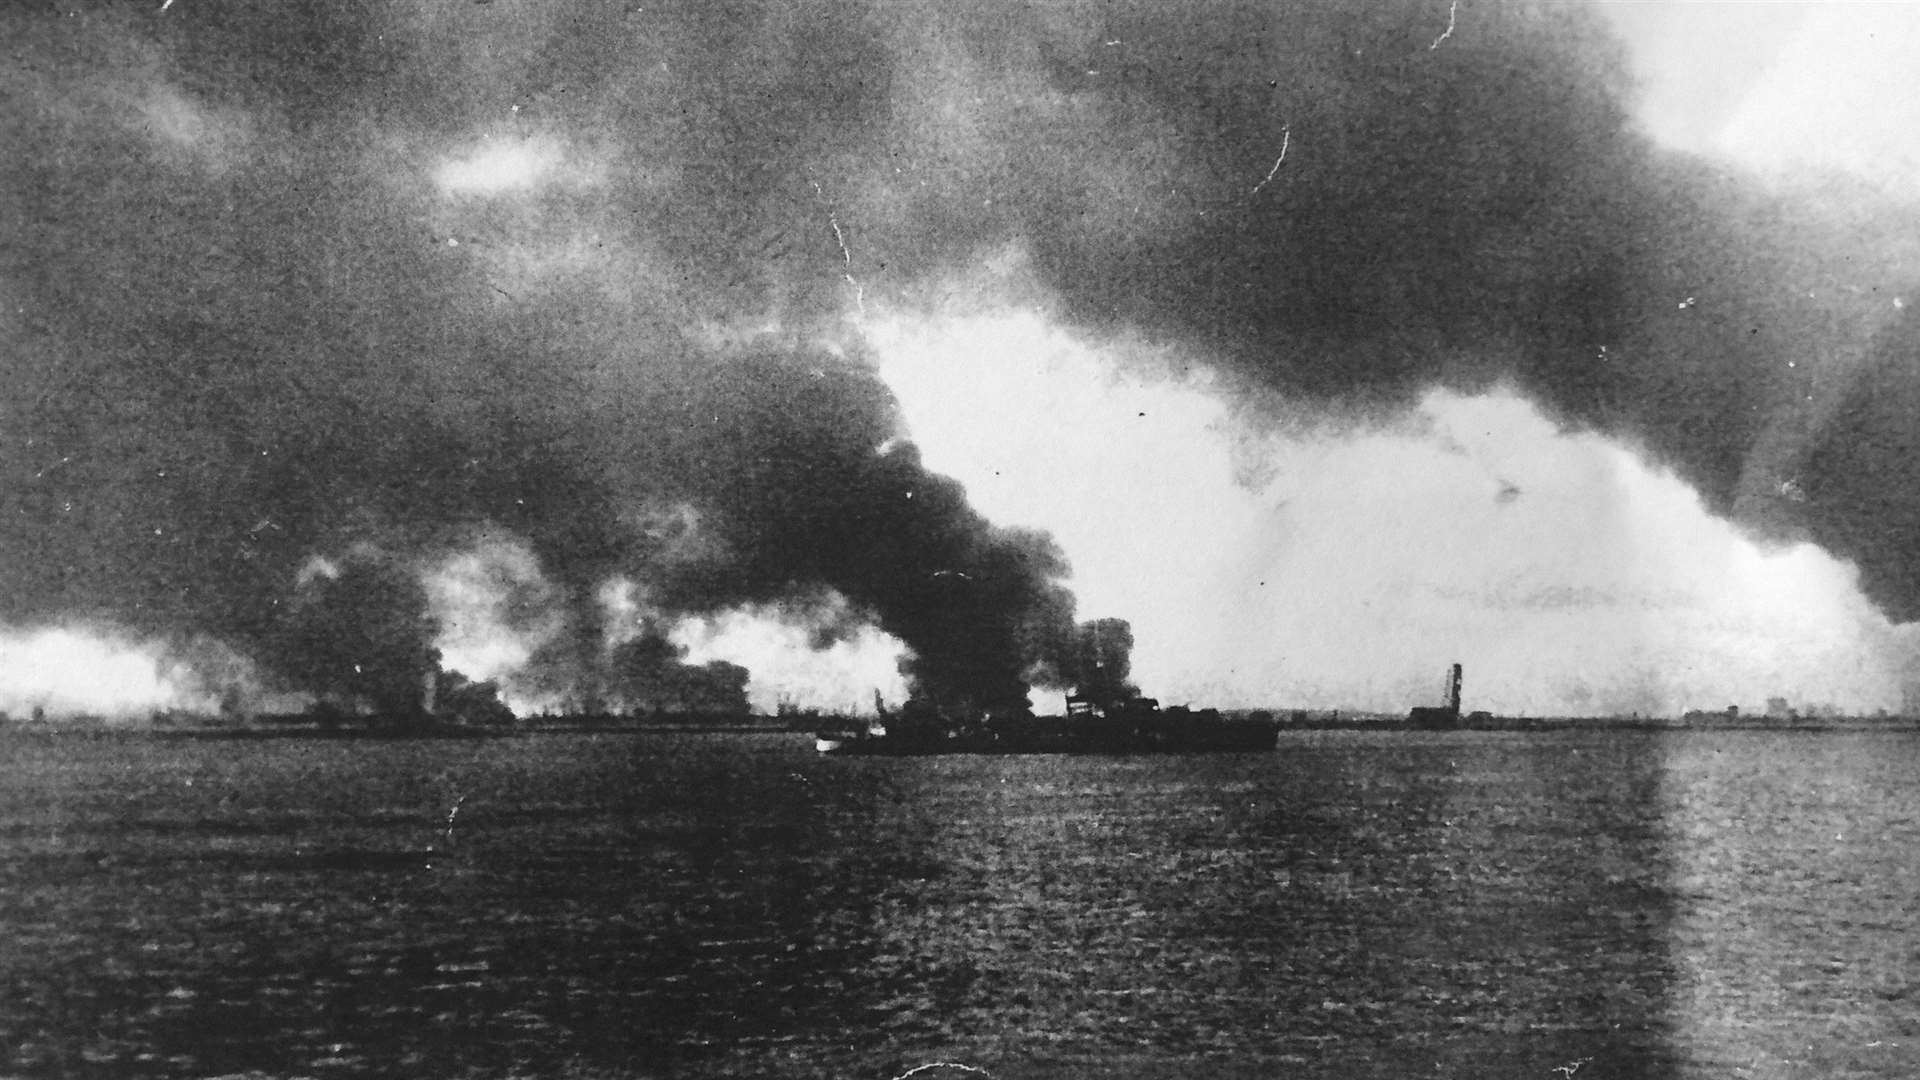 Ships on fire at Dunkirk, 1940